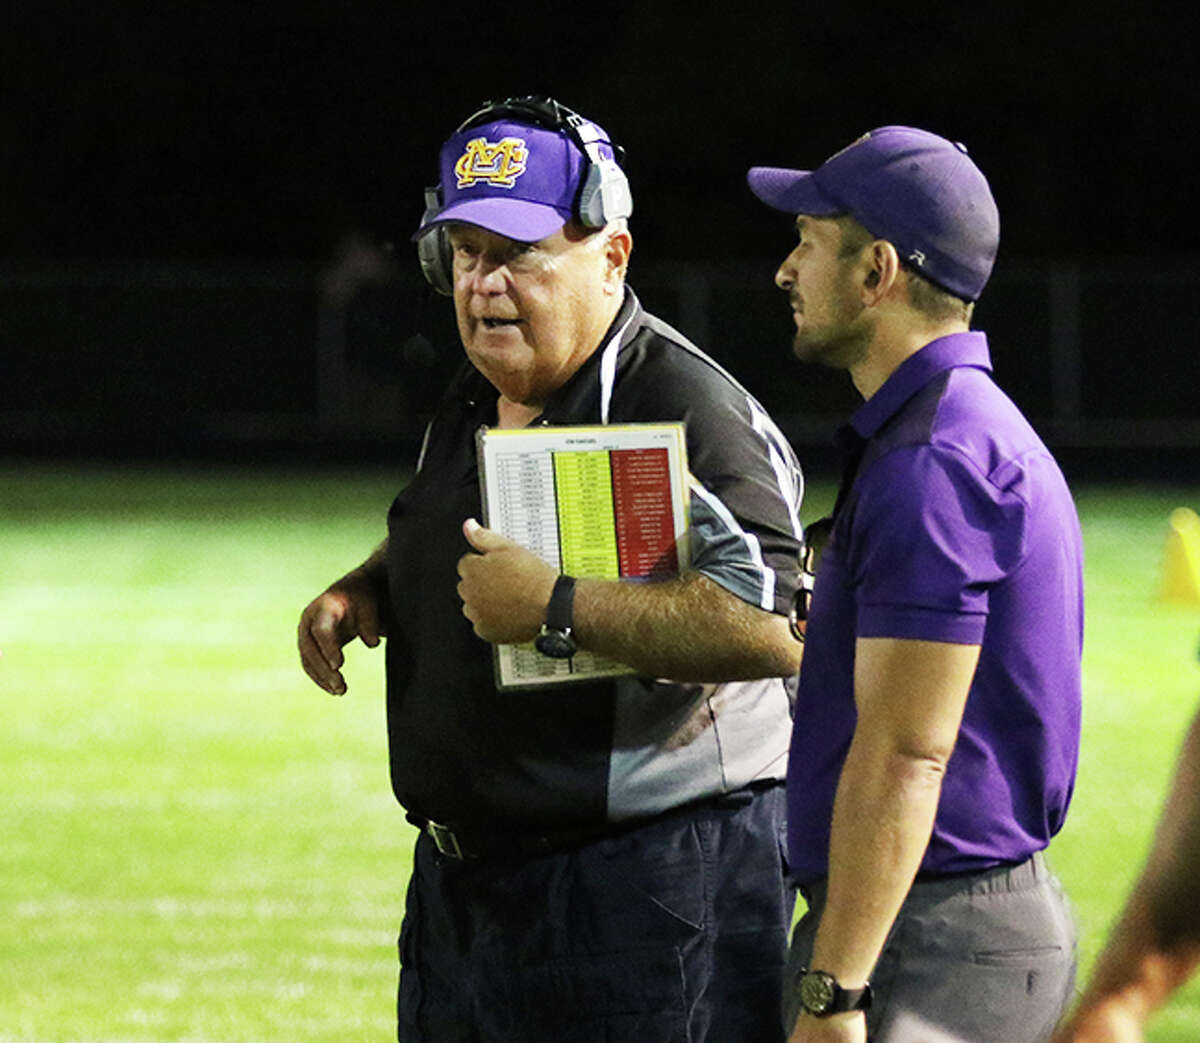 CM assistant coach Rick Reinhart (left) works the sideline during an Eagles game last season in Bethalto. On Tuesday night, Reinhart was approved as CM's new head coach to replace the retired Mike Parmentier. It is Reinhart's second stint in the job, winning 97 games in 18 seasons with the Eagles from 1989-2006.